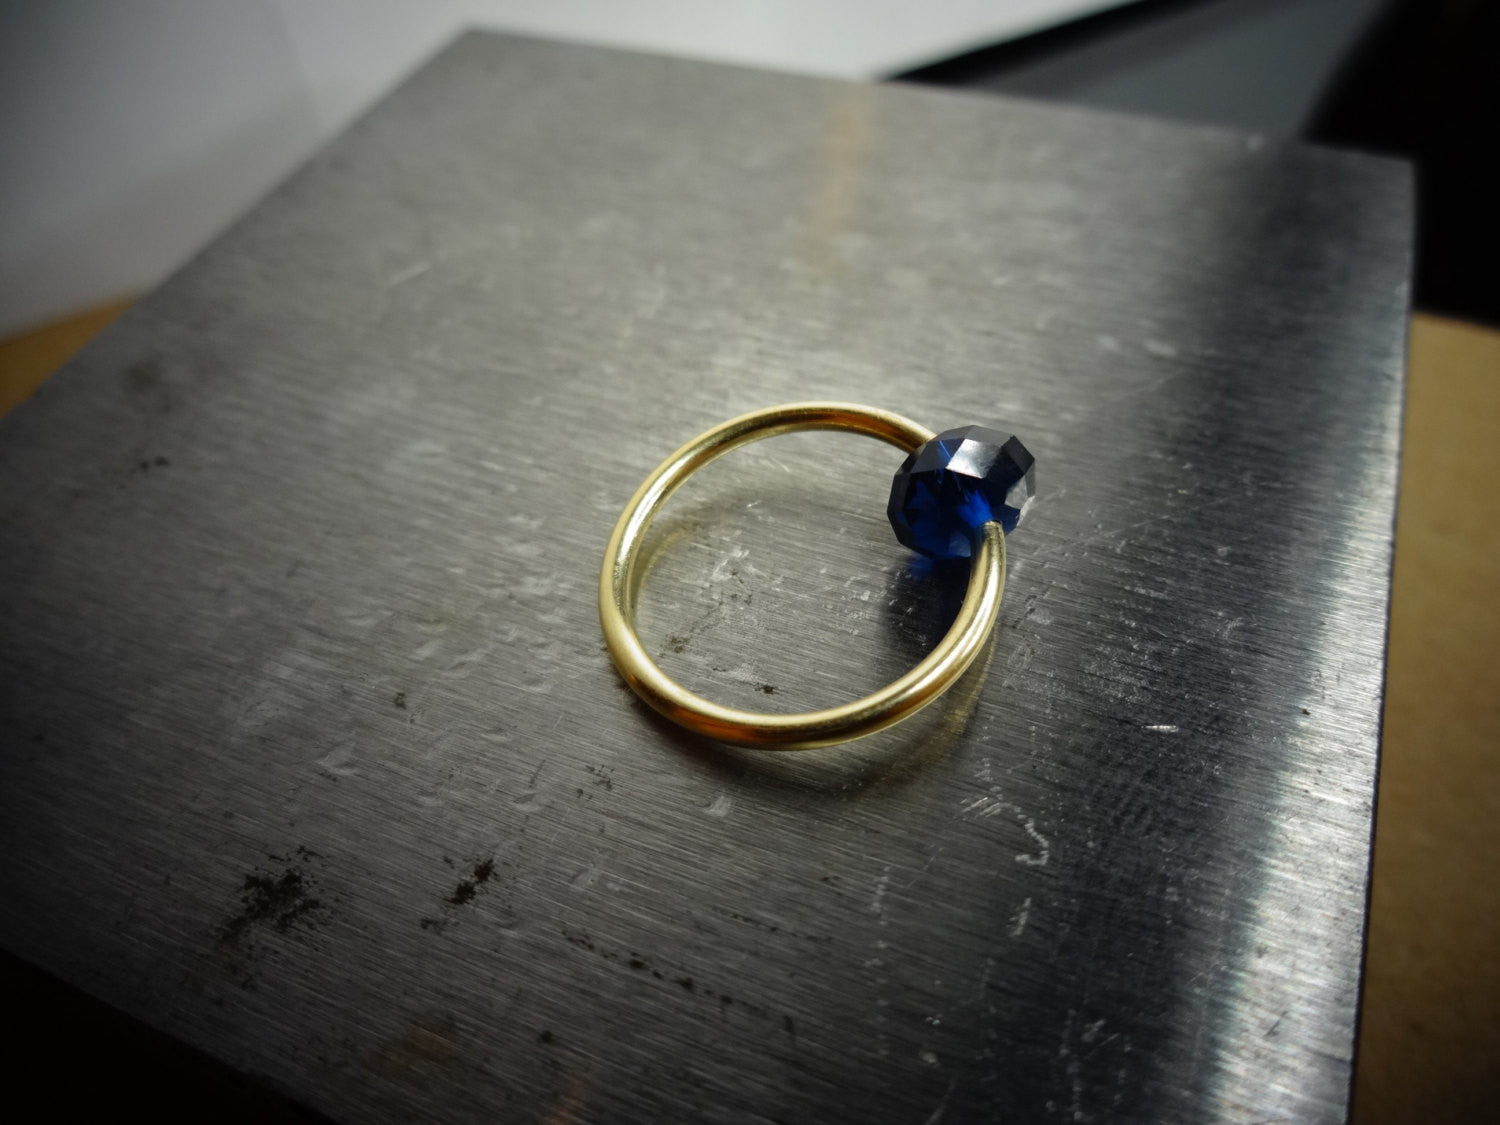 Captive Bead Ring made with NAVY BLUE Swarovski Crystal - 14 ga Hoop - 14k Gold (Y, W, or R), Sterling Silver, or Platinum